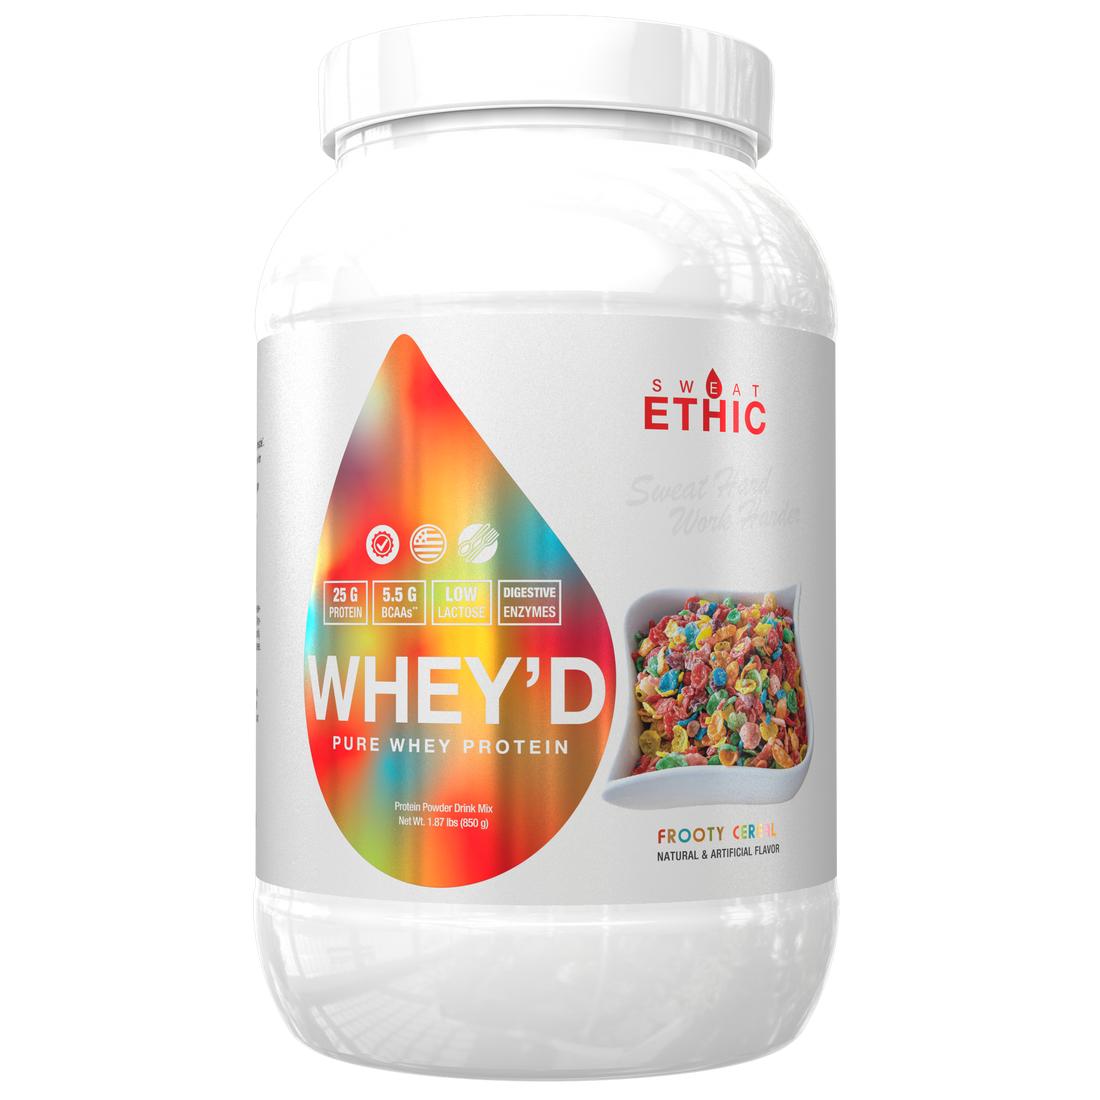 Whey'd Protein by Sweat Ethic